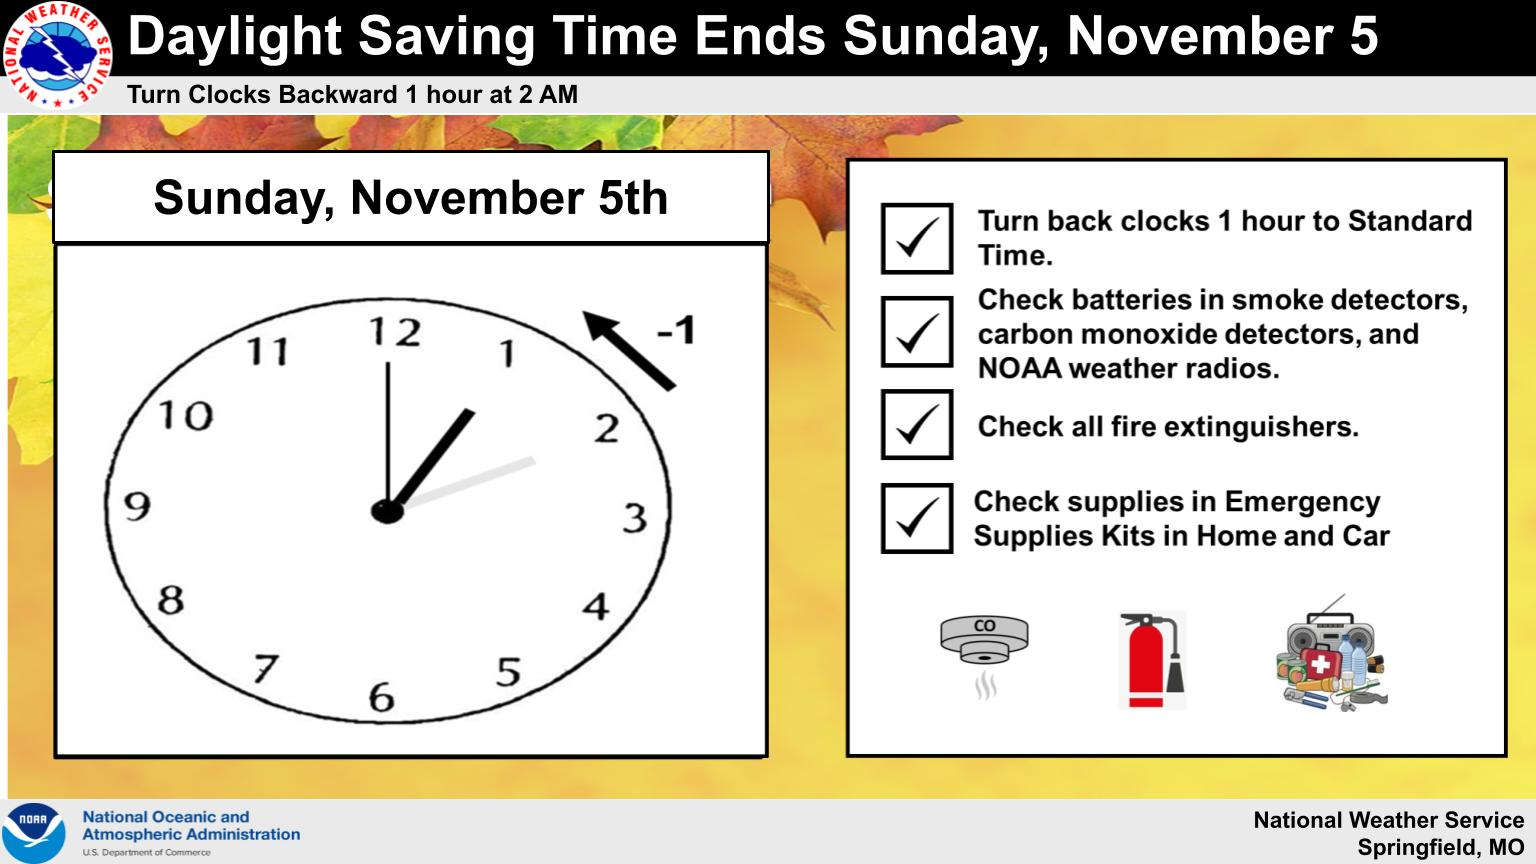 Daylight Saving Time ends: Why we have it and how it impacts health